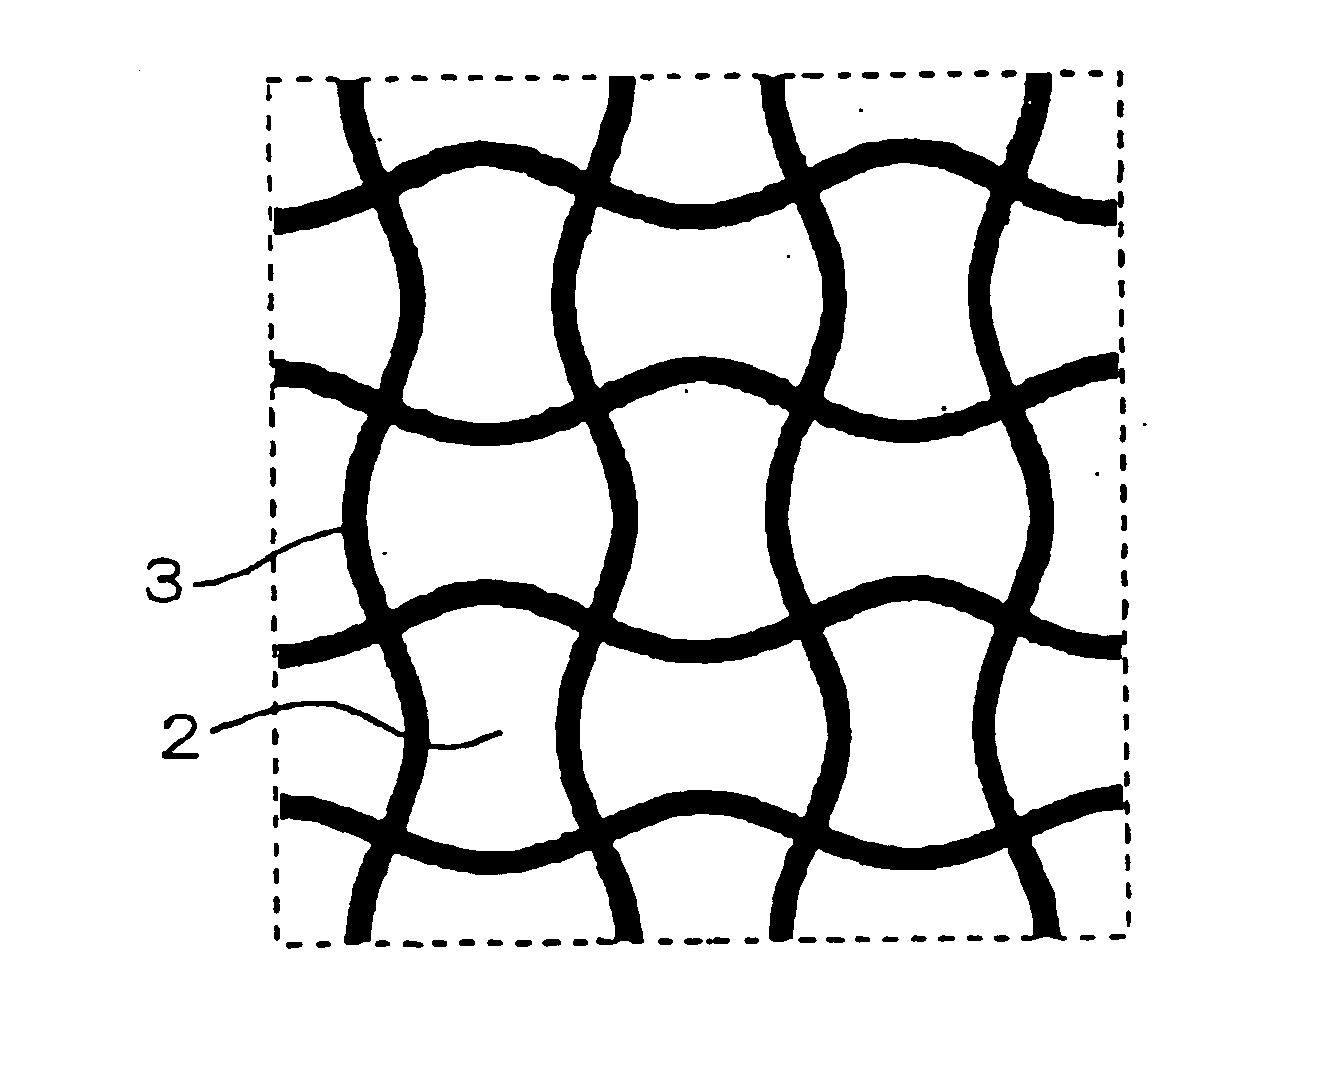 Ceramic filter and filter device